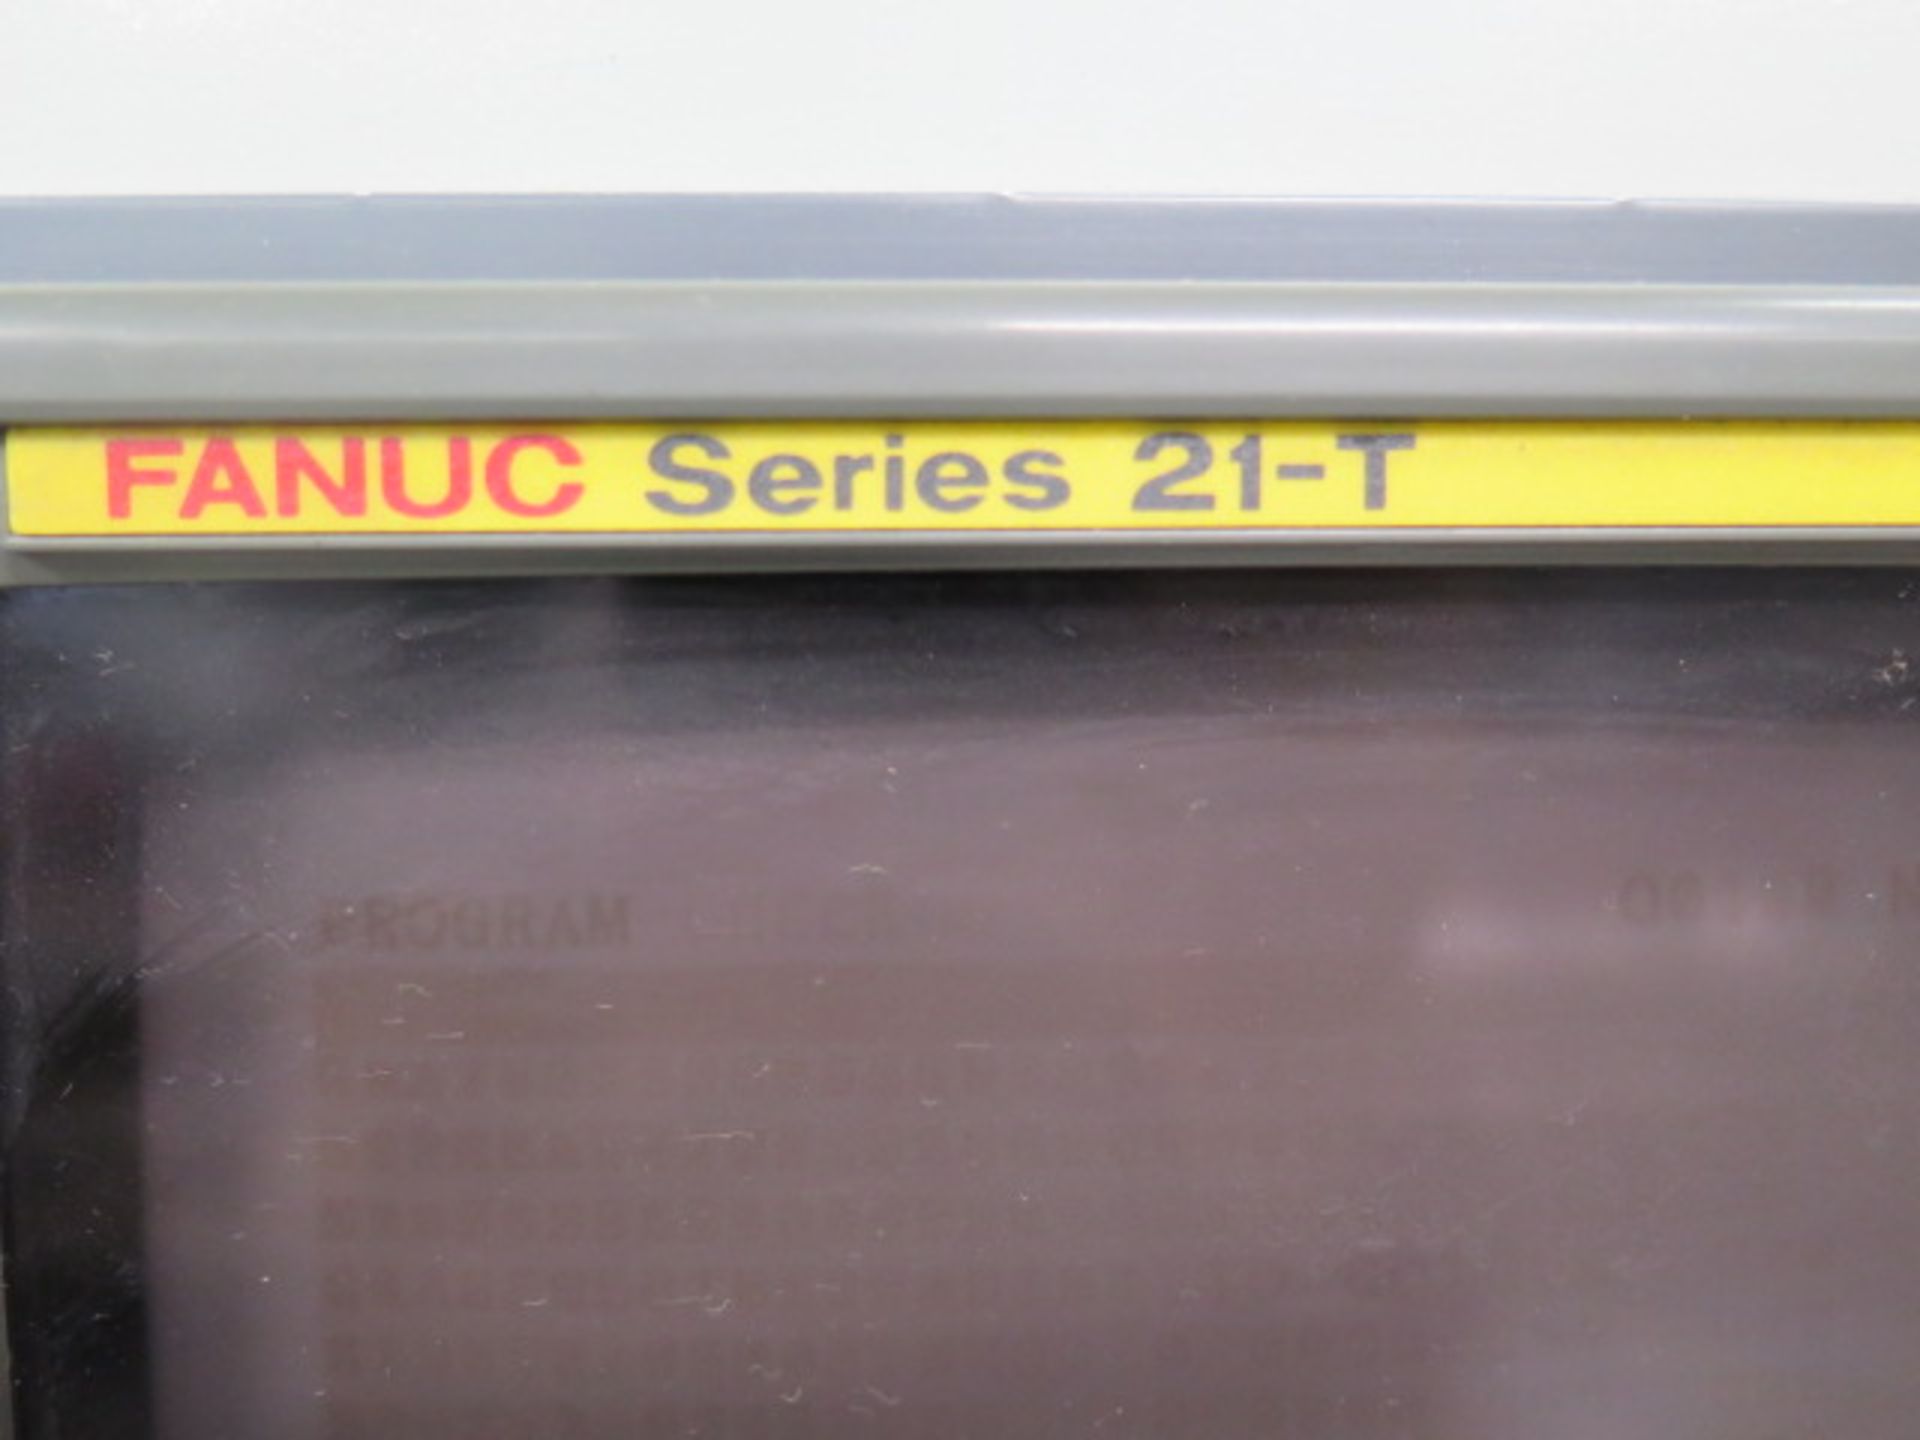 Nakamura-Tome SC-300 CNC Turning Center s/n S303902 w/ Fanuc Series 21-T Controls, SOLD AS IS - Image 6 of 20